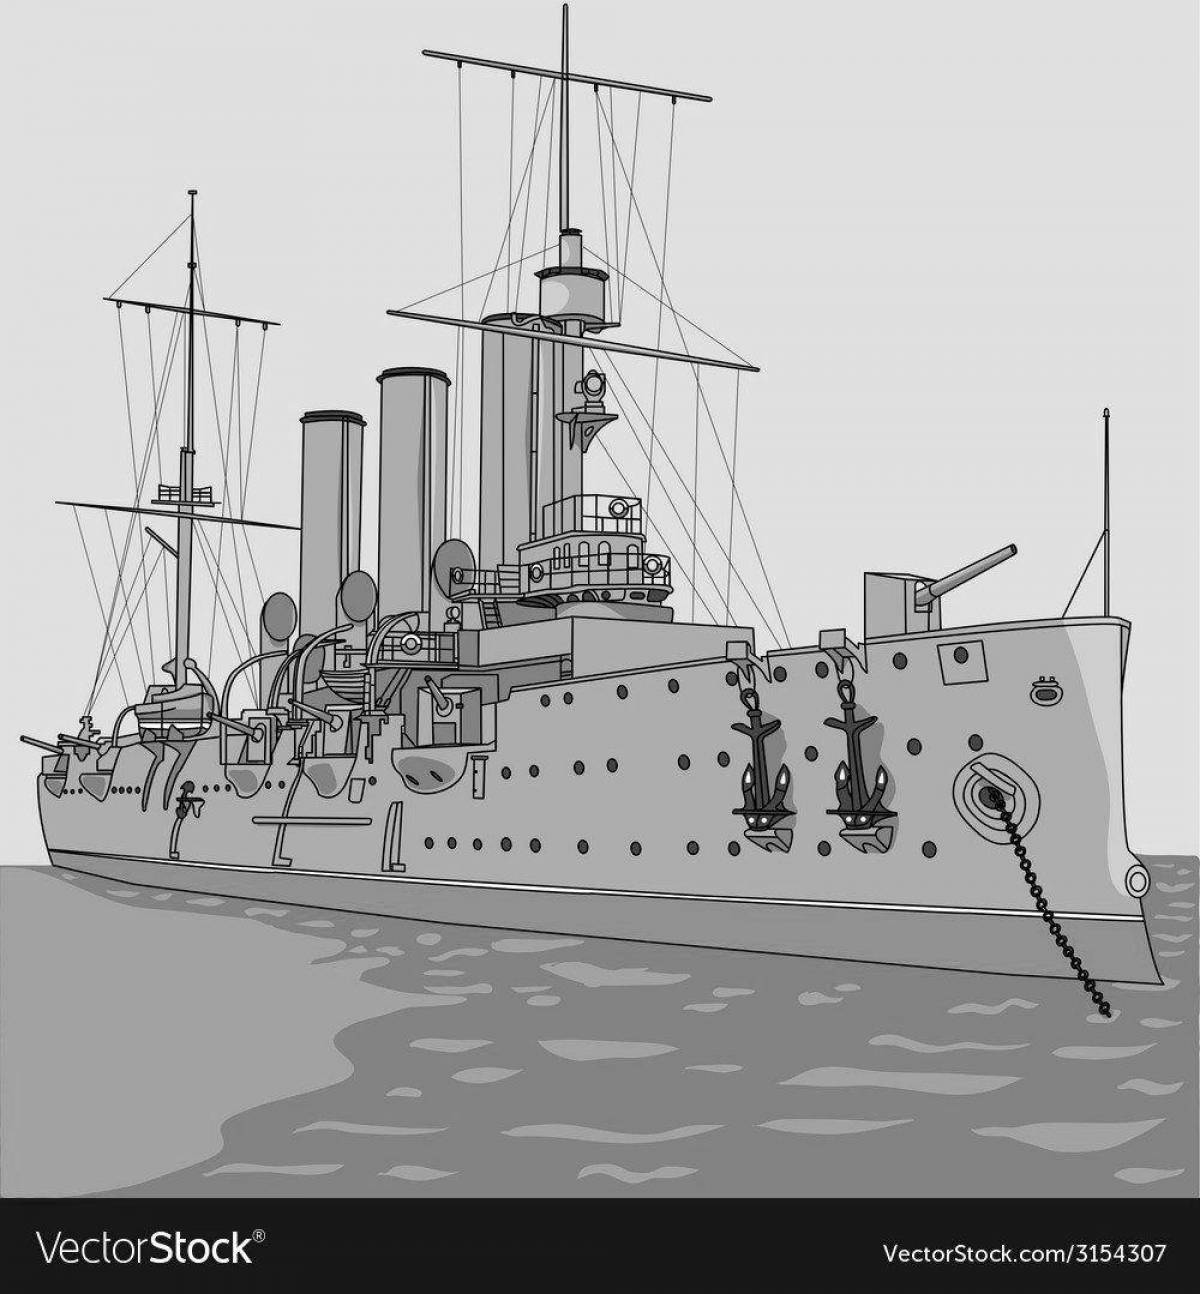 Radiant cruiser aurora coloring book for kids